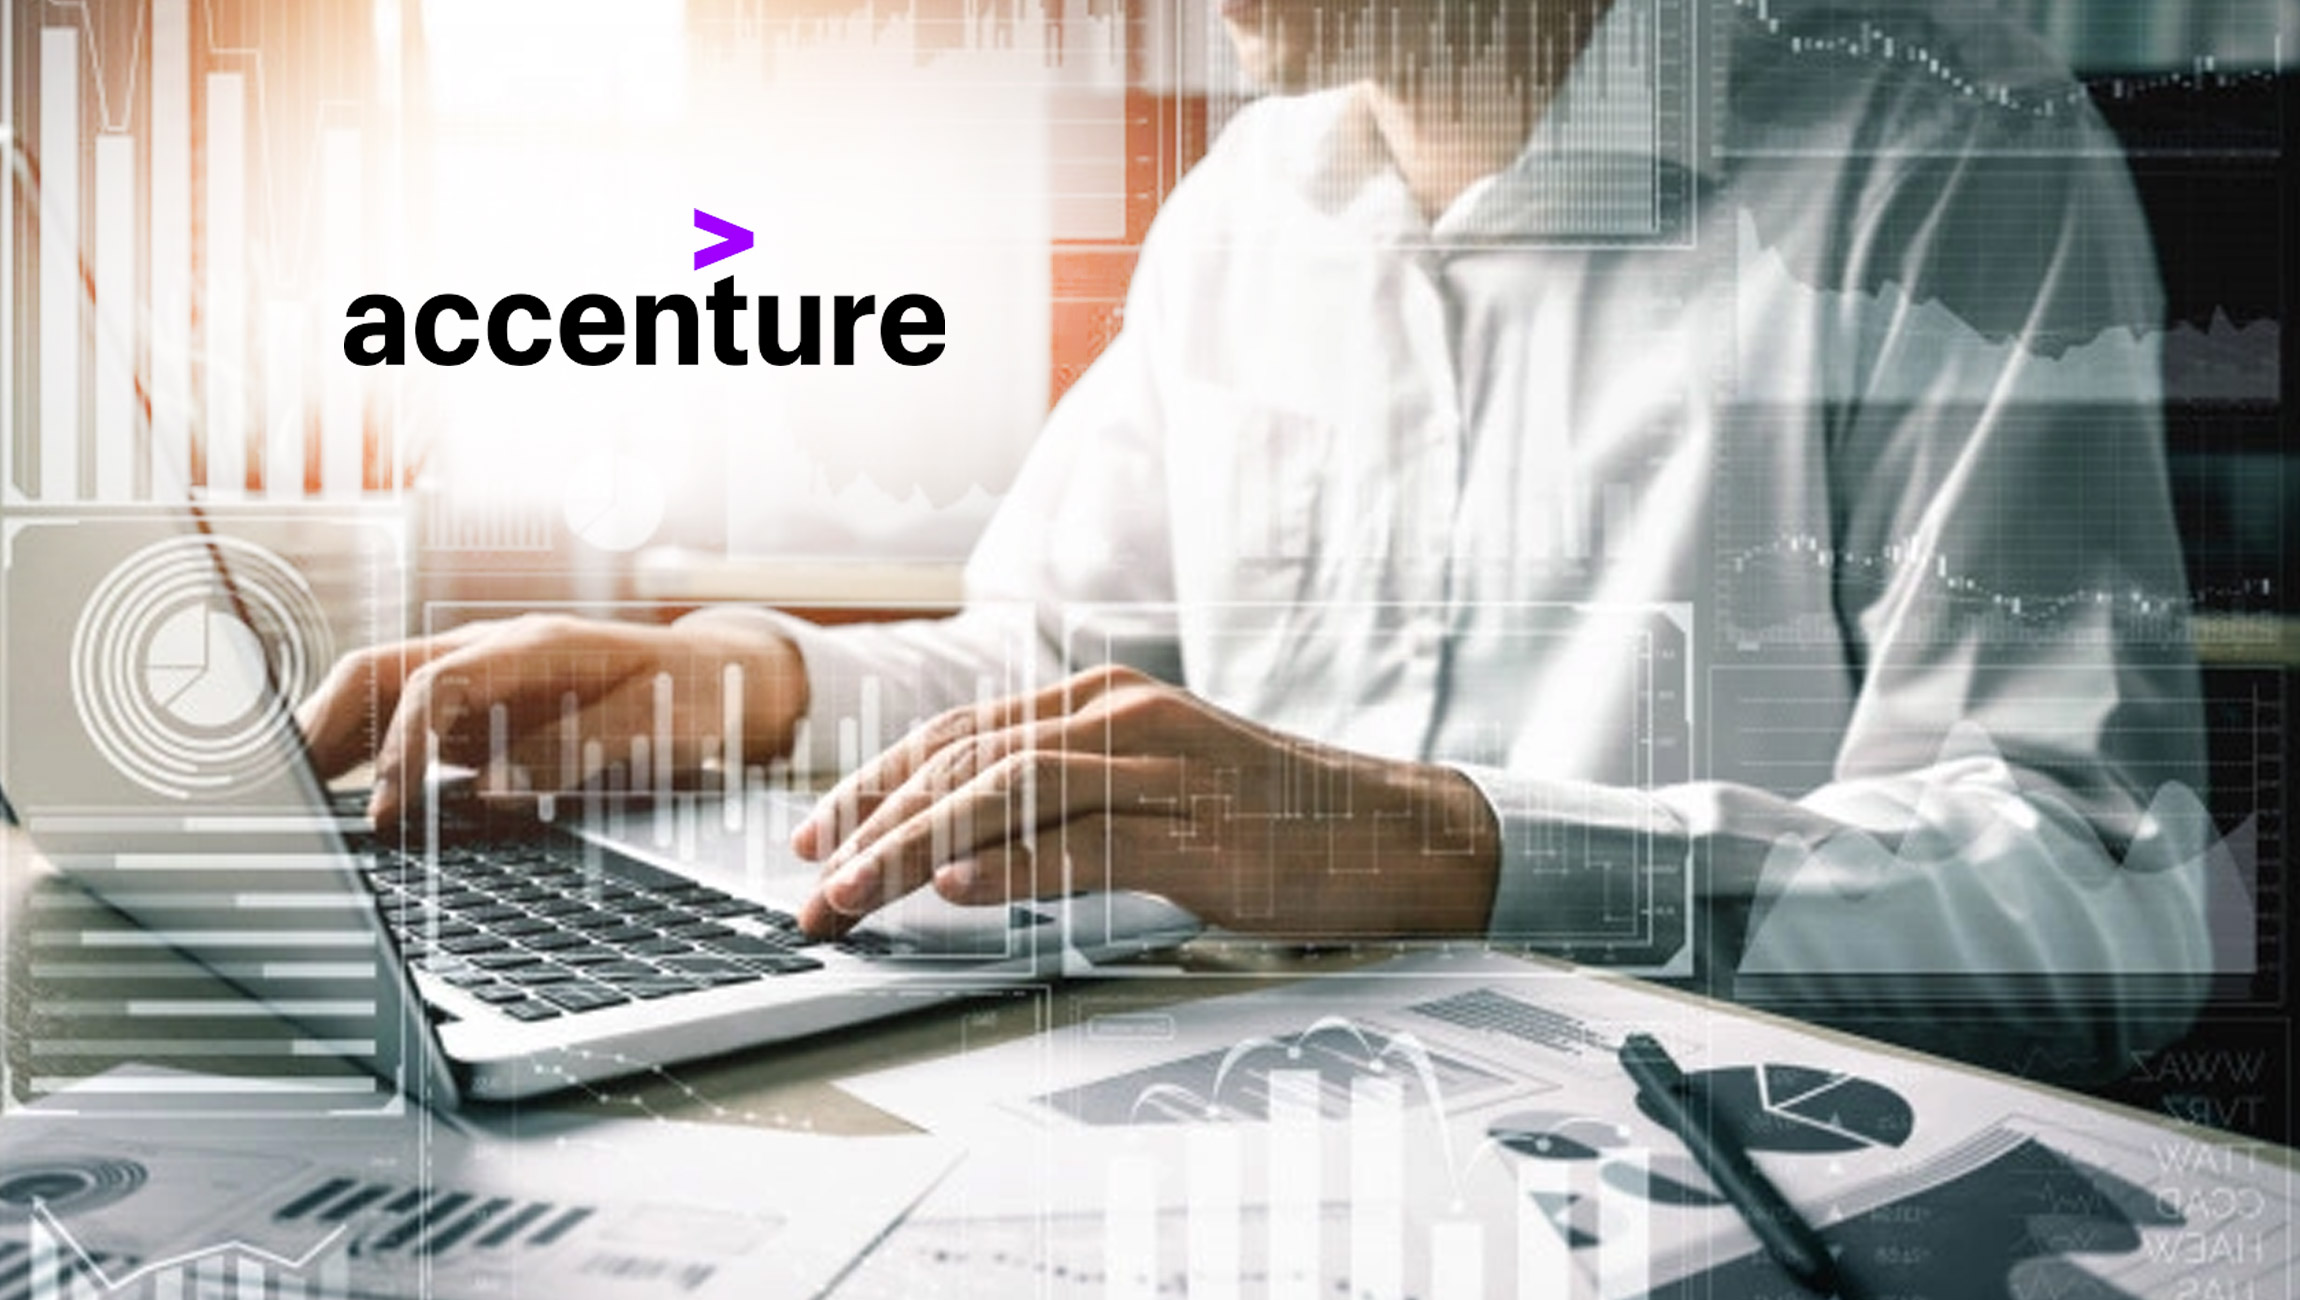 Sustainable Technology Strategy Critical for Achieving Business Growth and ESG Performance, According to New Accenture Report 1